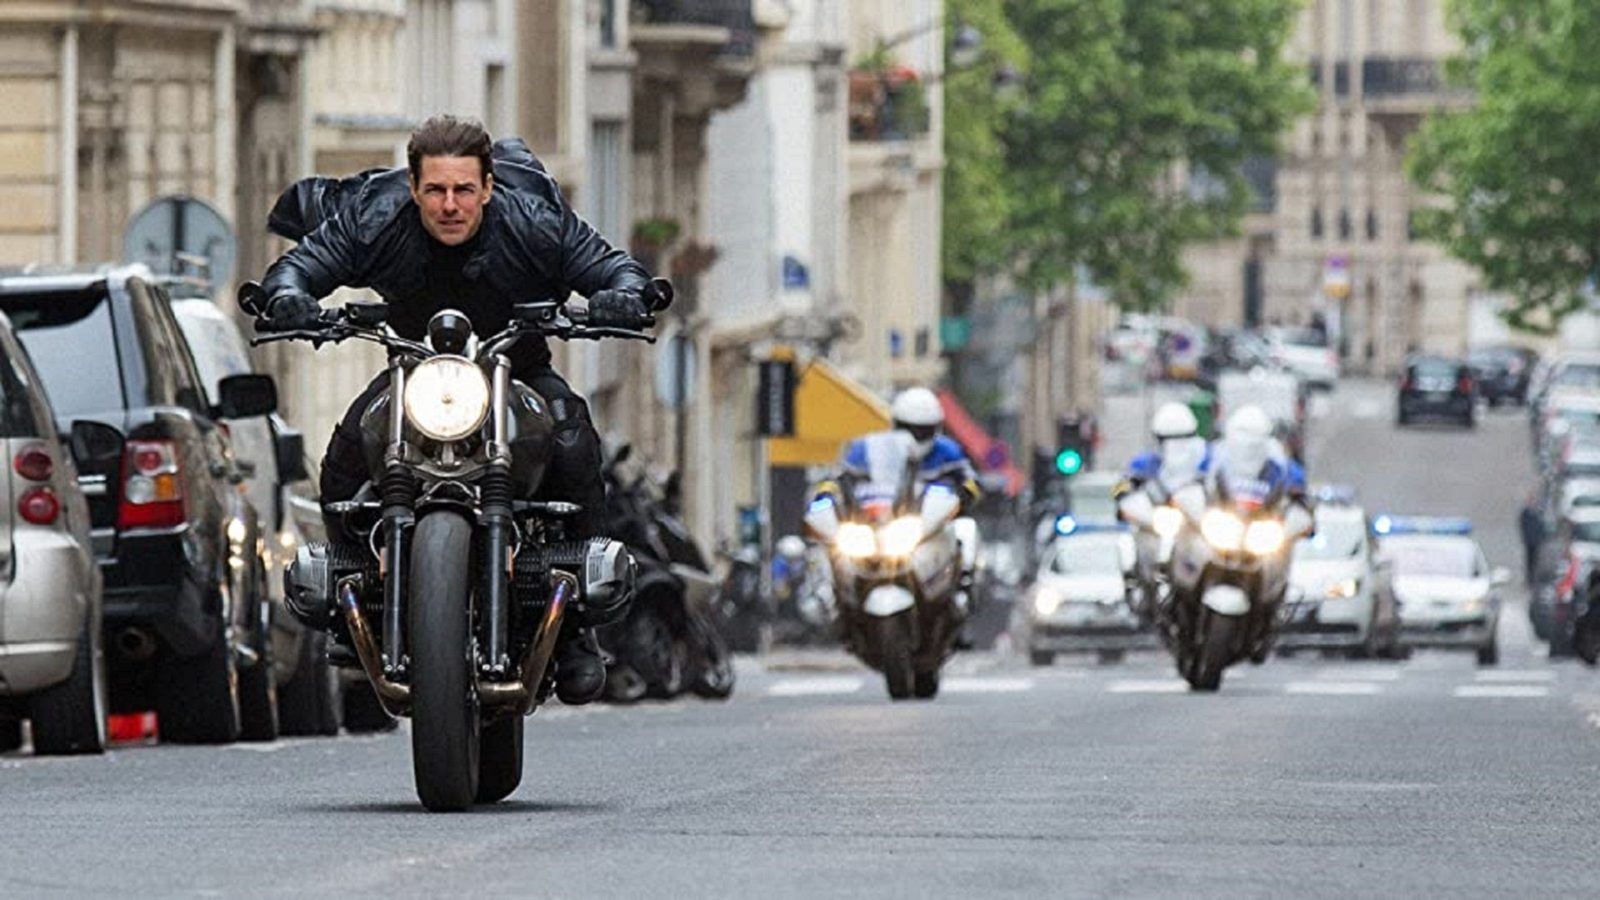 ‘Mission: Impossible’ filming locations around the world you can visit